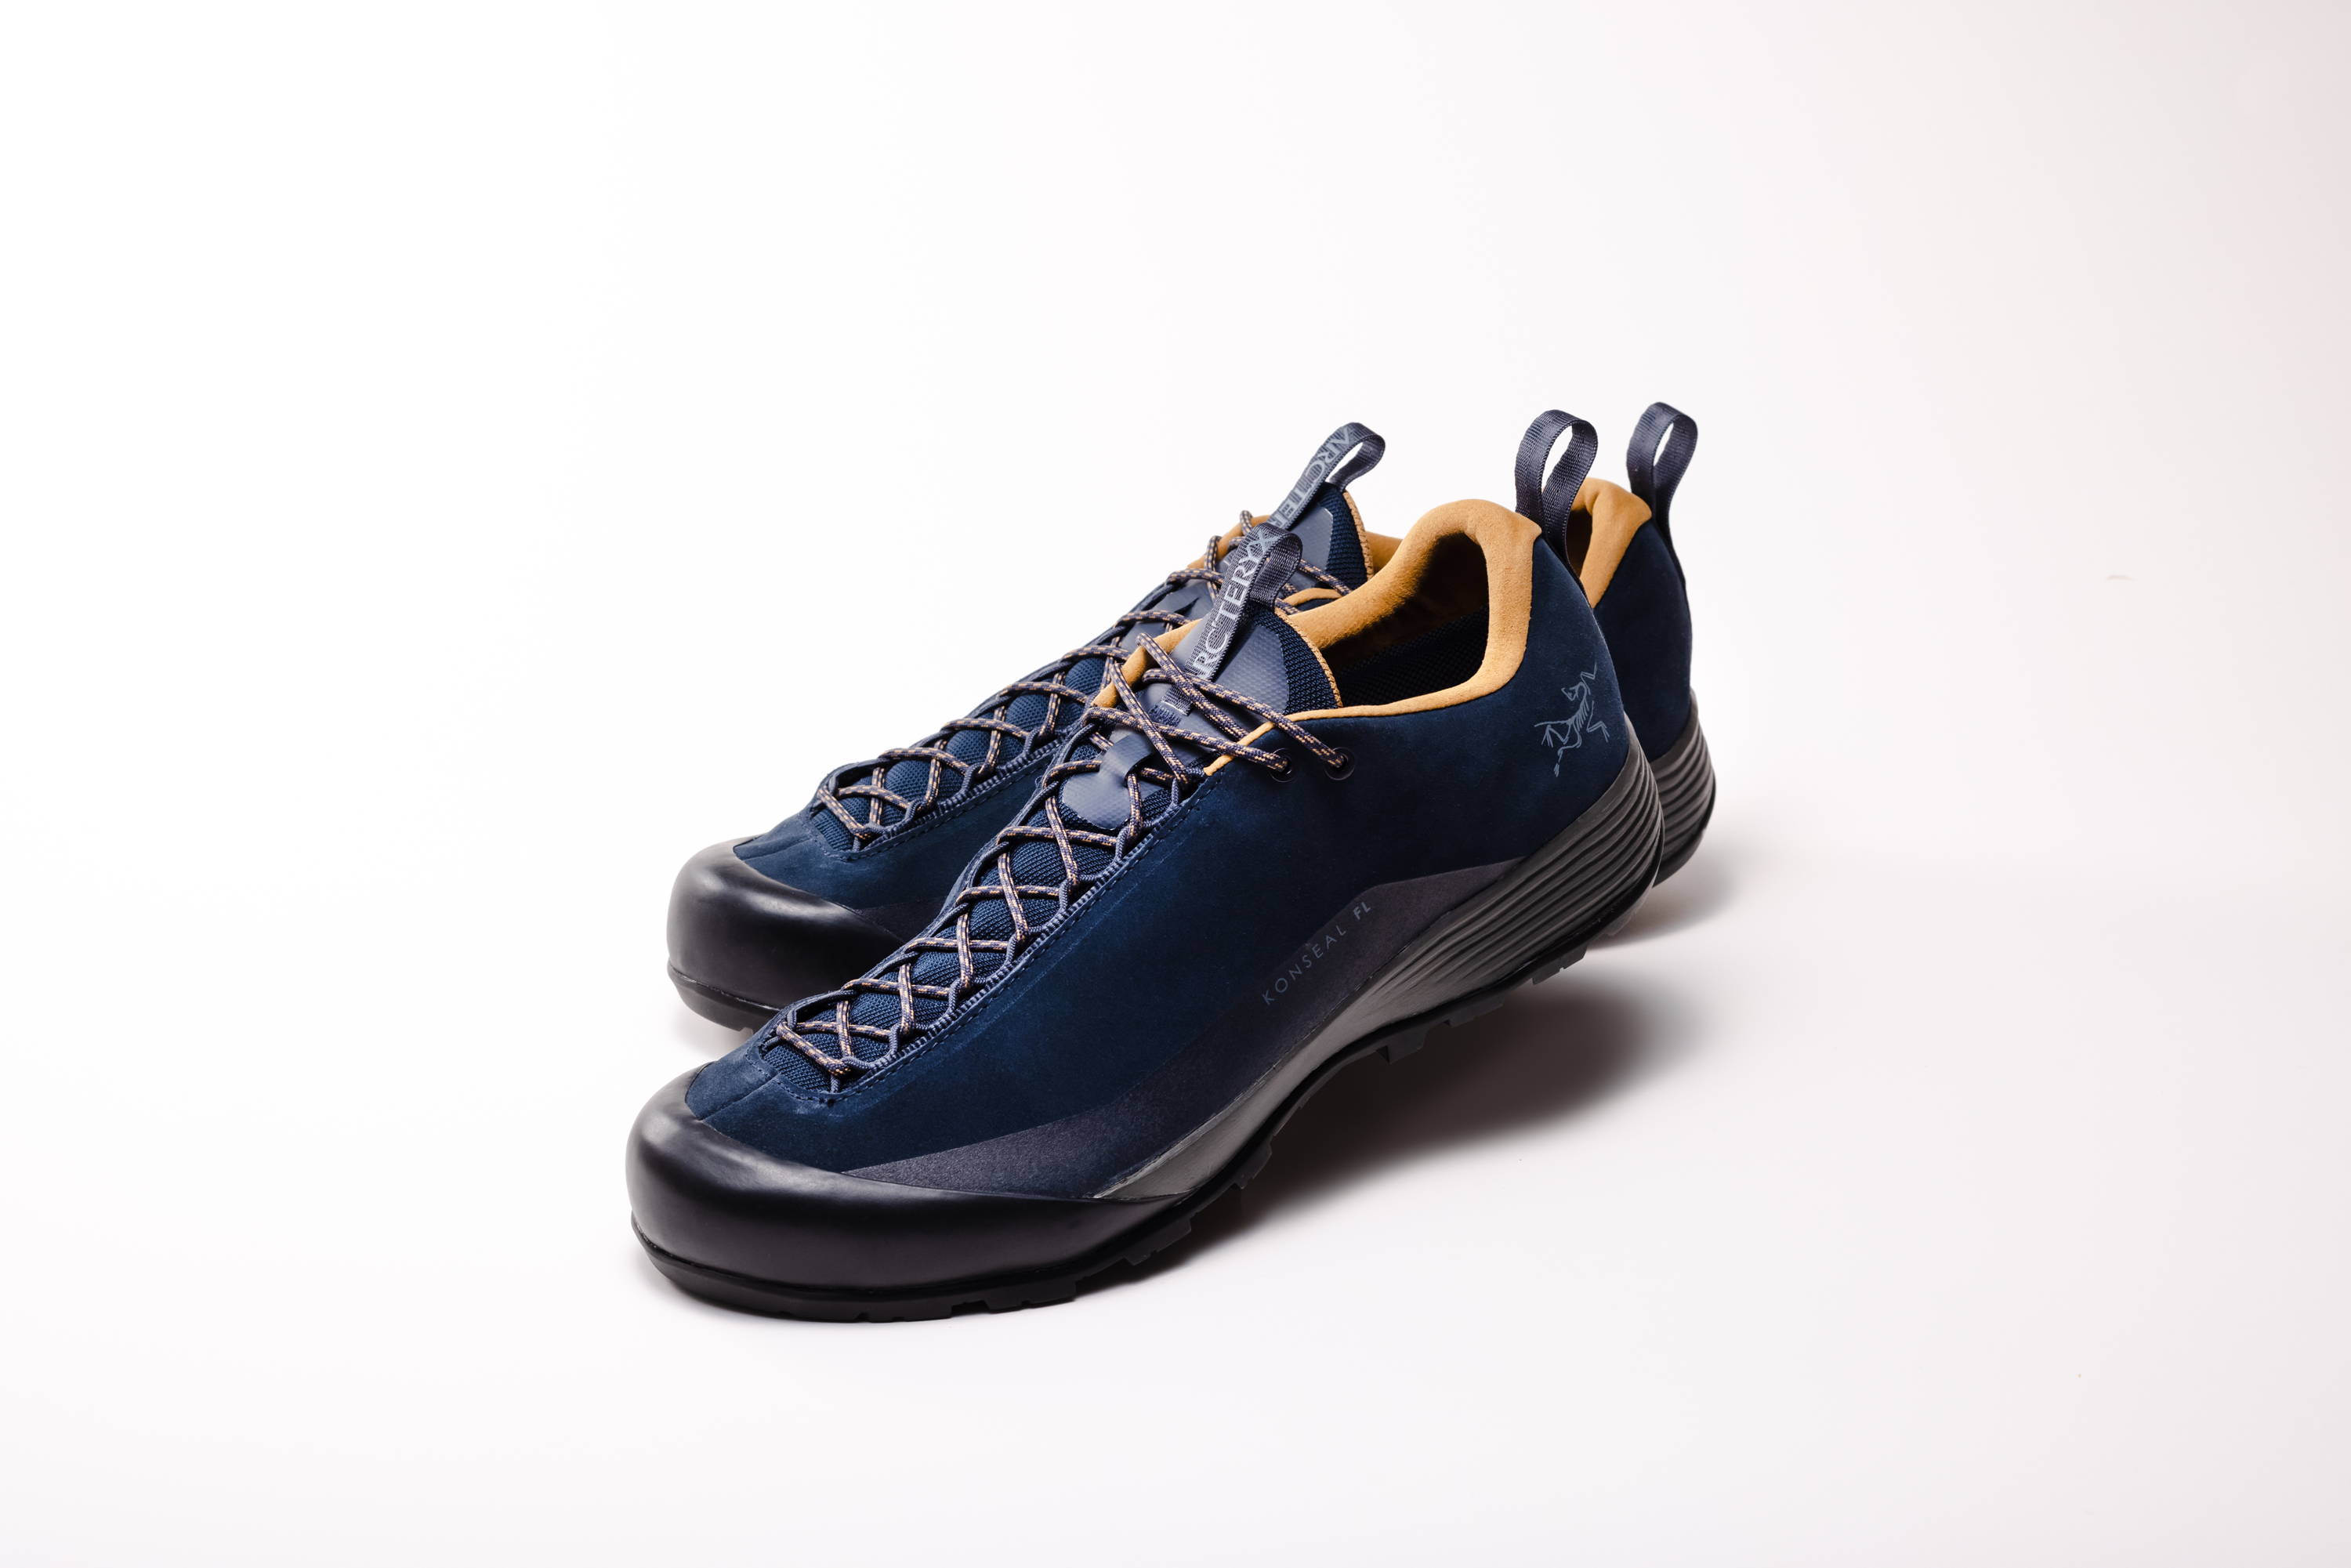 KONSEAL TECHNICAL APPROOACH SHOES – アークテリクス 